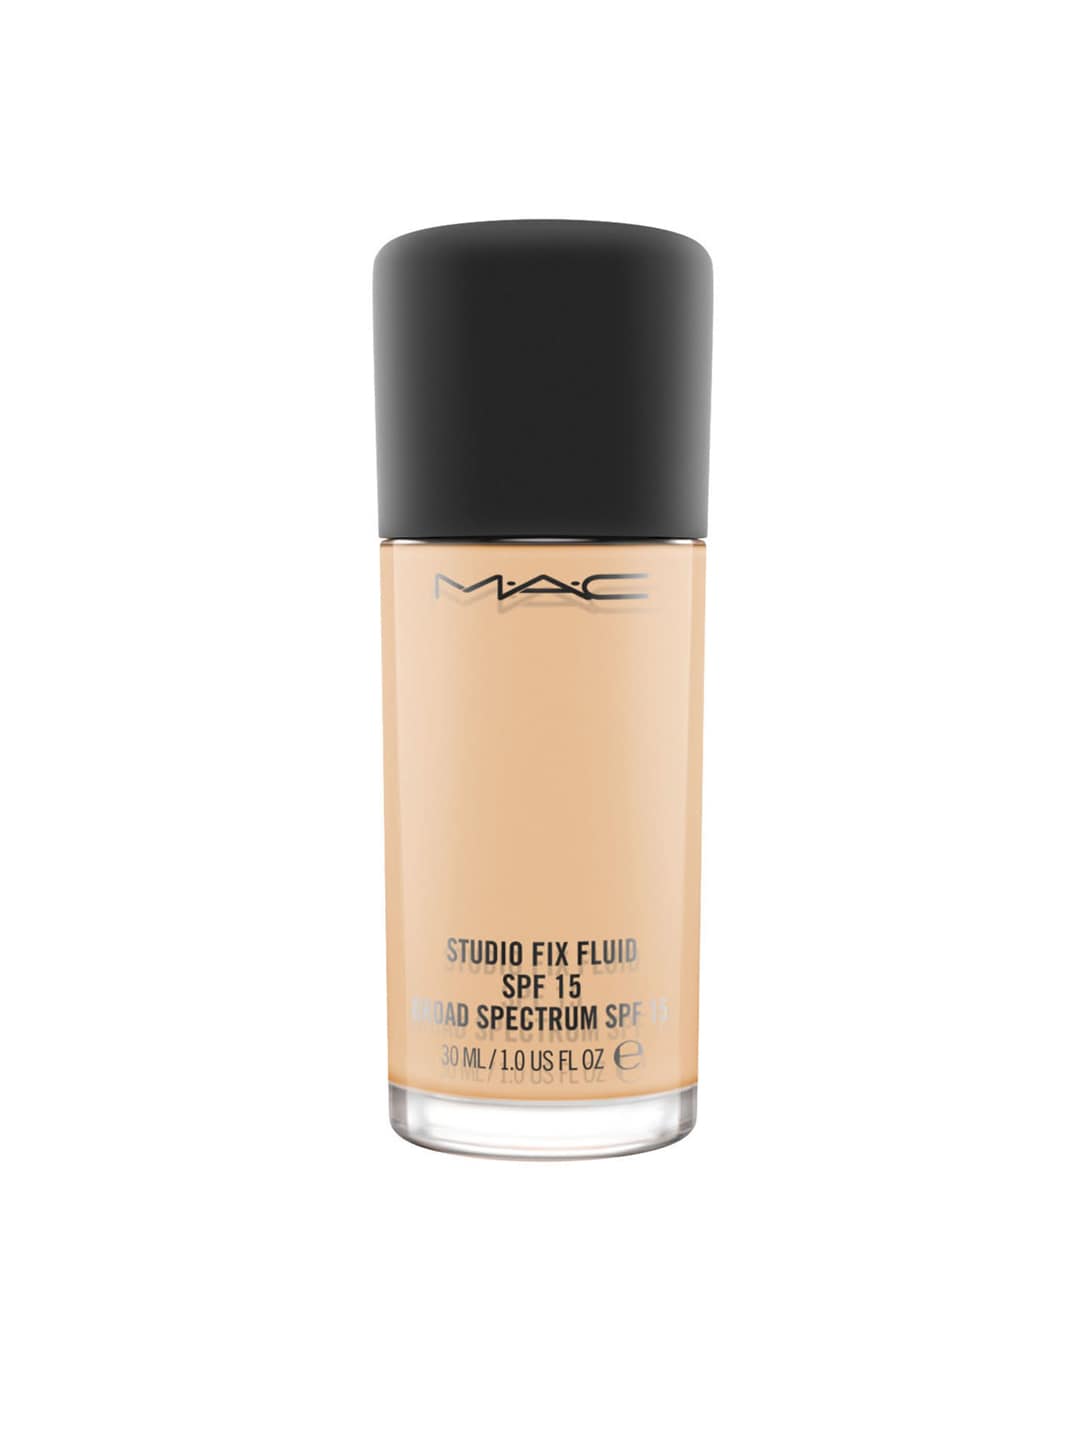 M.A.C Studio Fix Fluid Foundation with SPF 15 - NC20 30ml Price in India